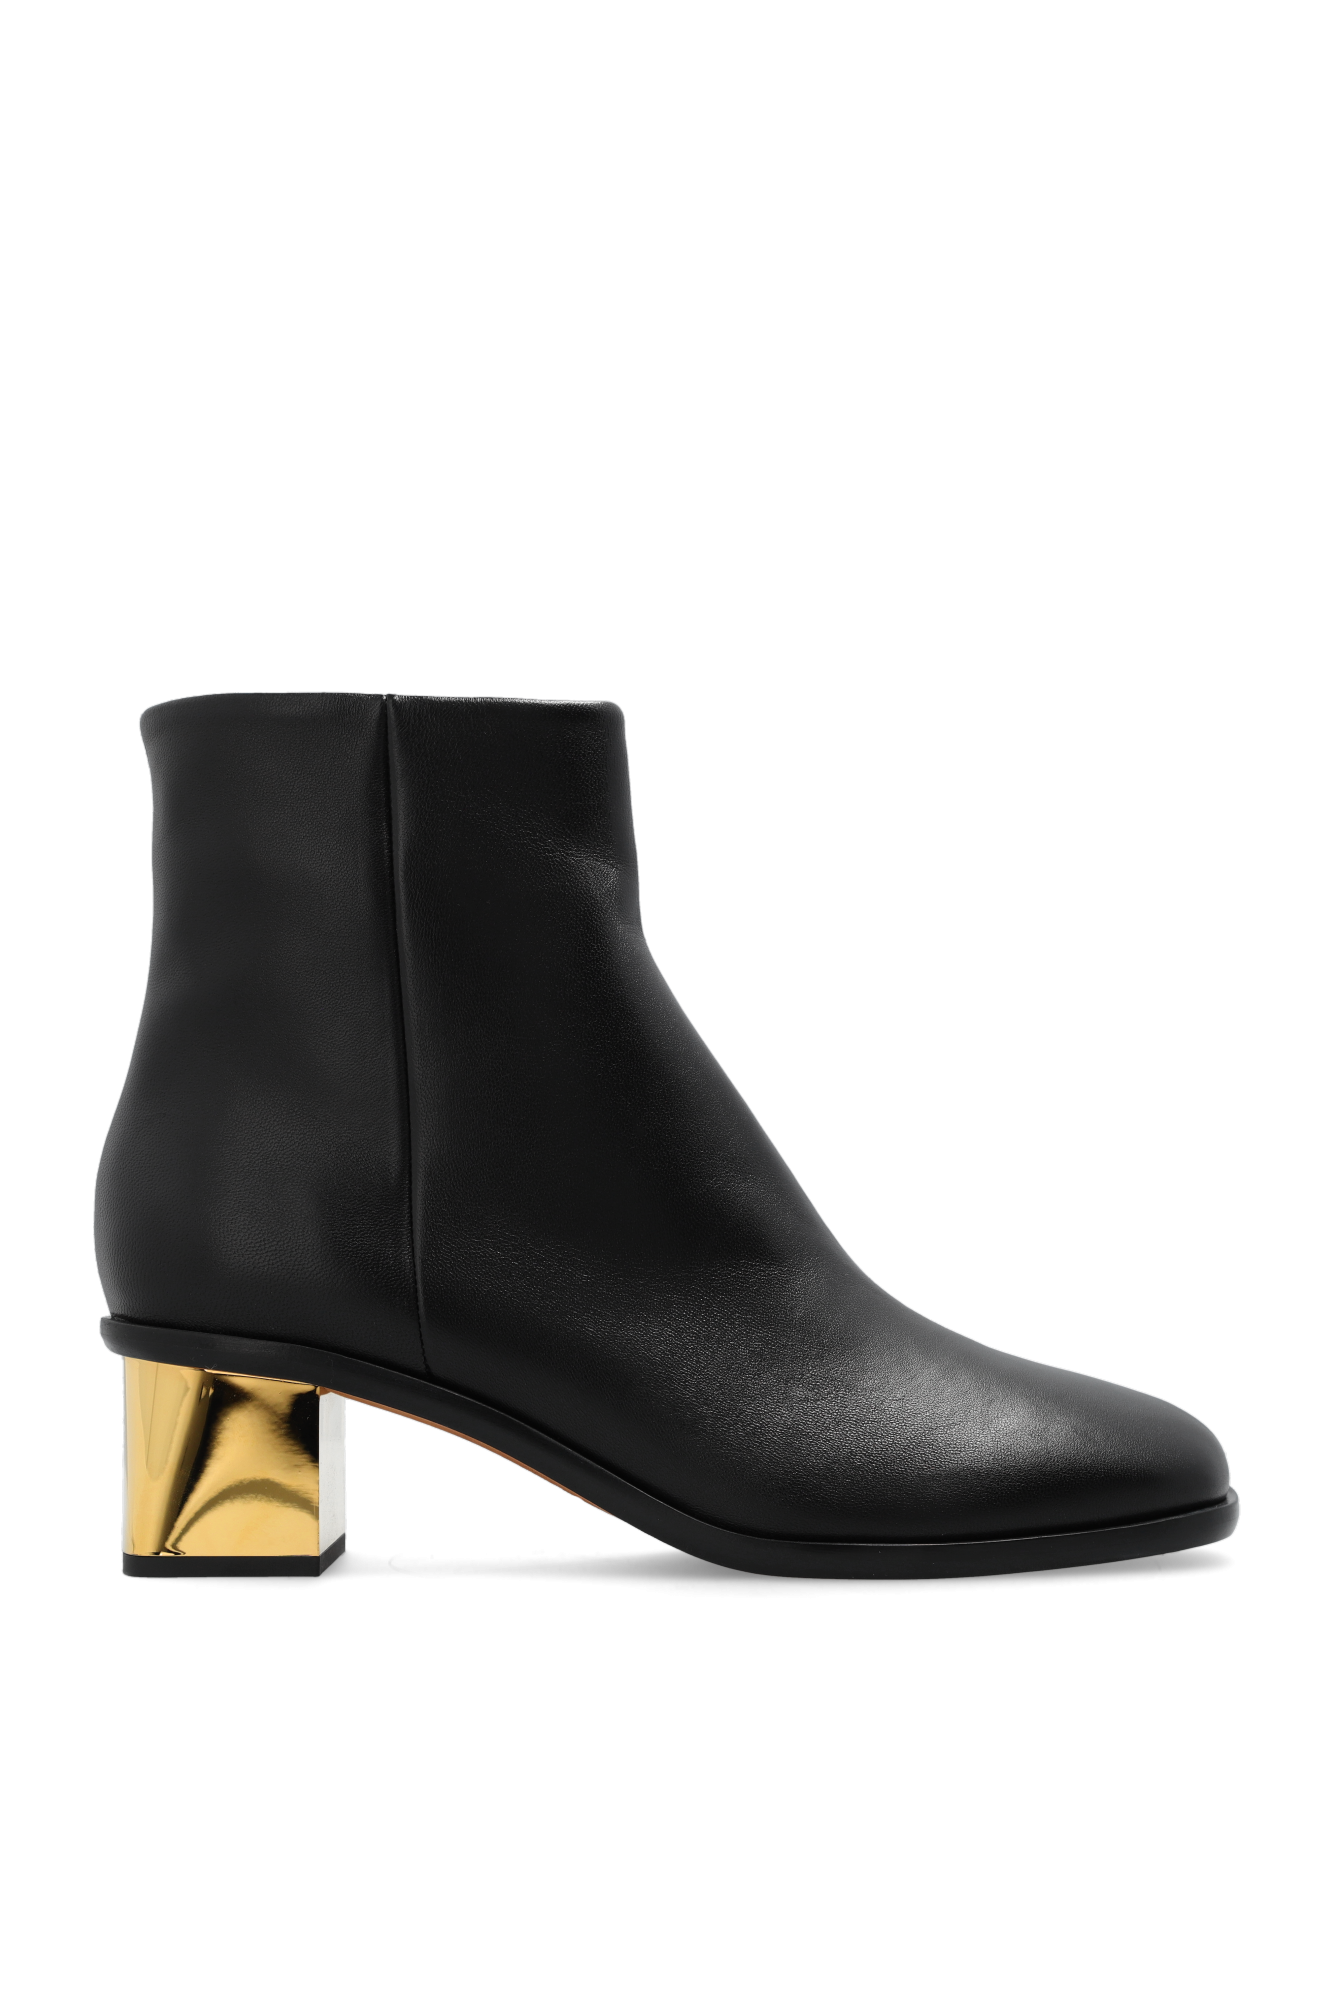 Chloé ‘Rebecca’ heeled ankle boots